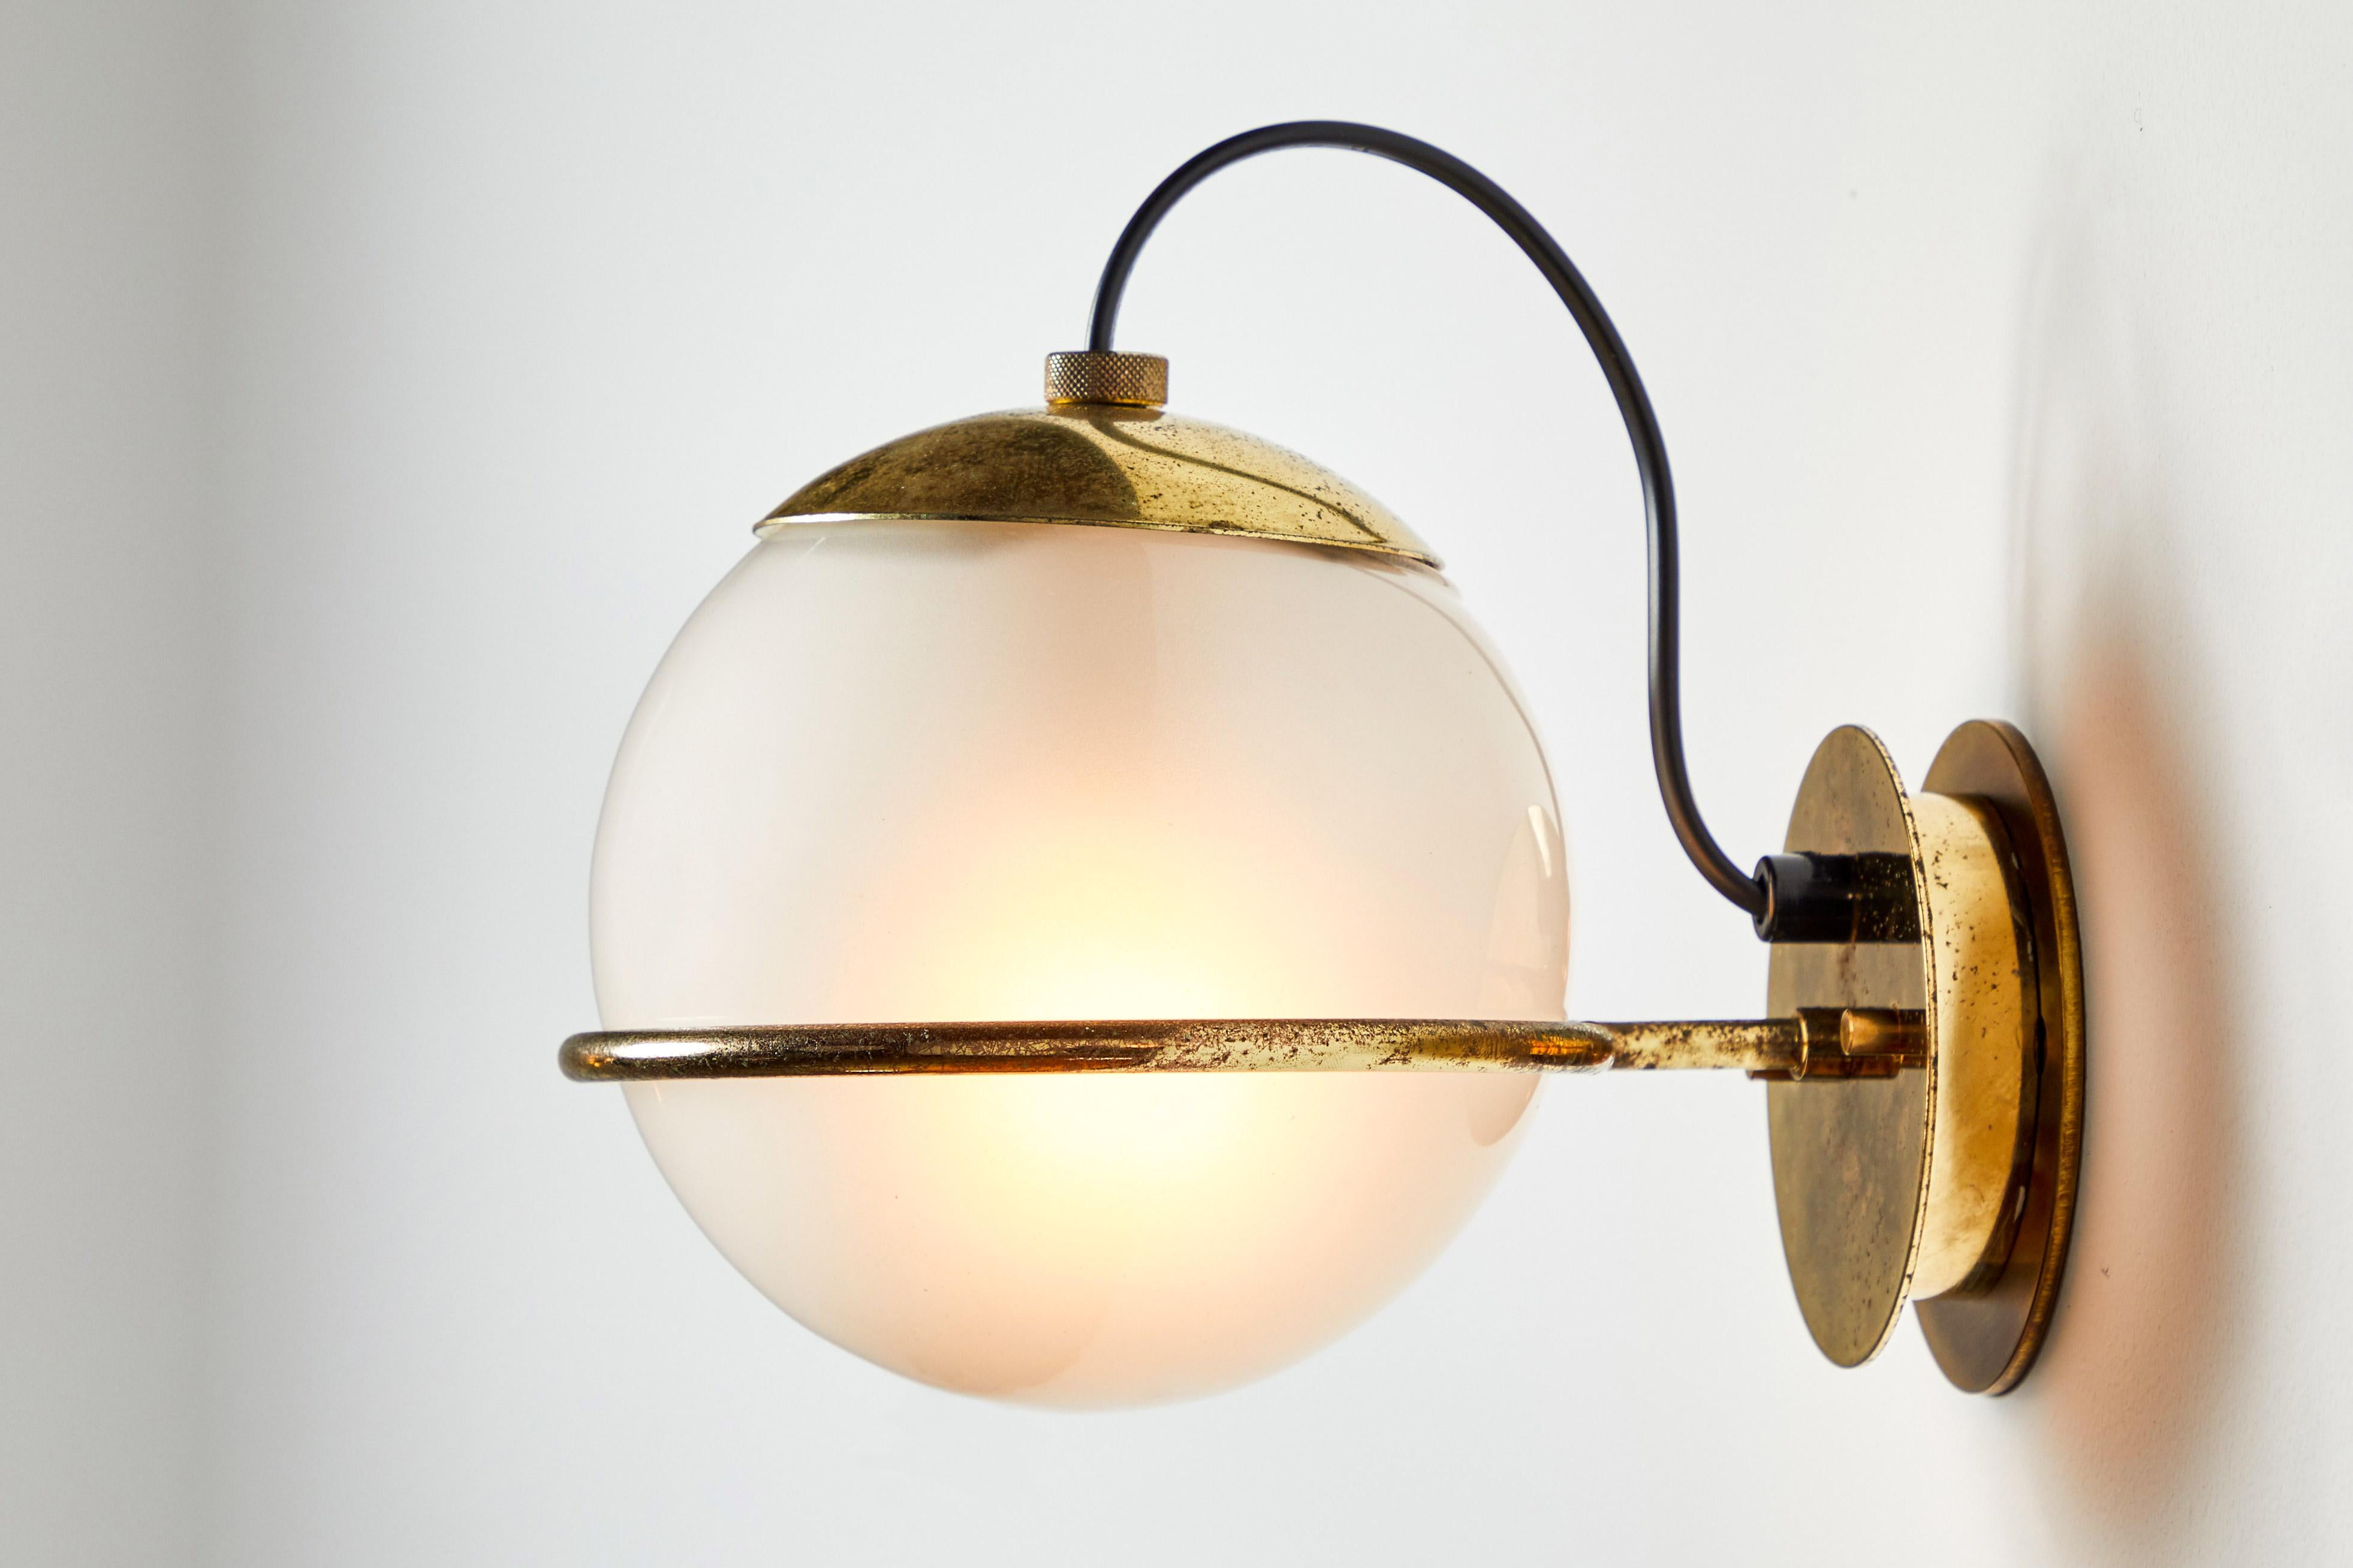 Mid-20th Century Pair of Model 237/1 Sconces by Gino Sarfatti for Arteluce